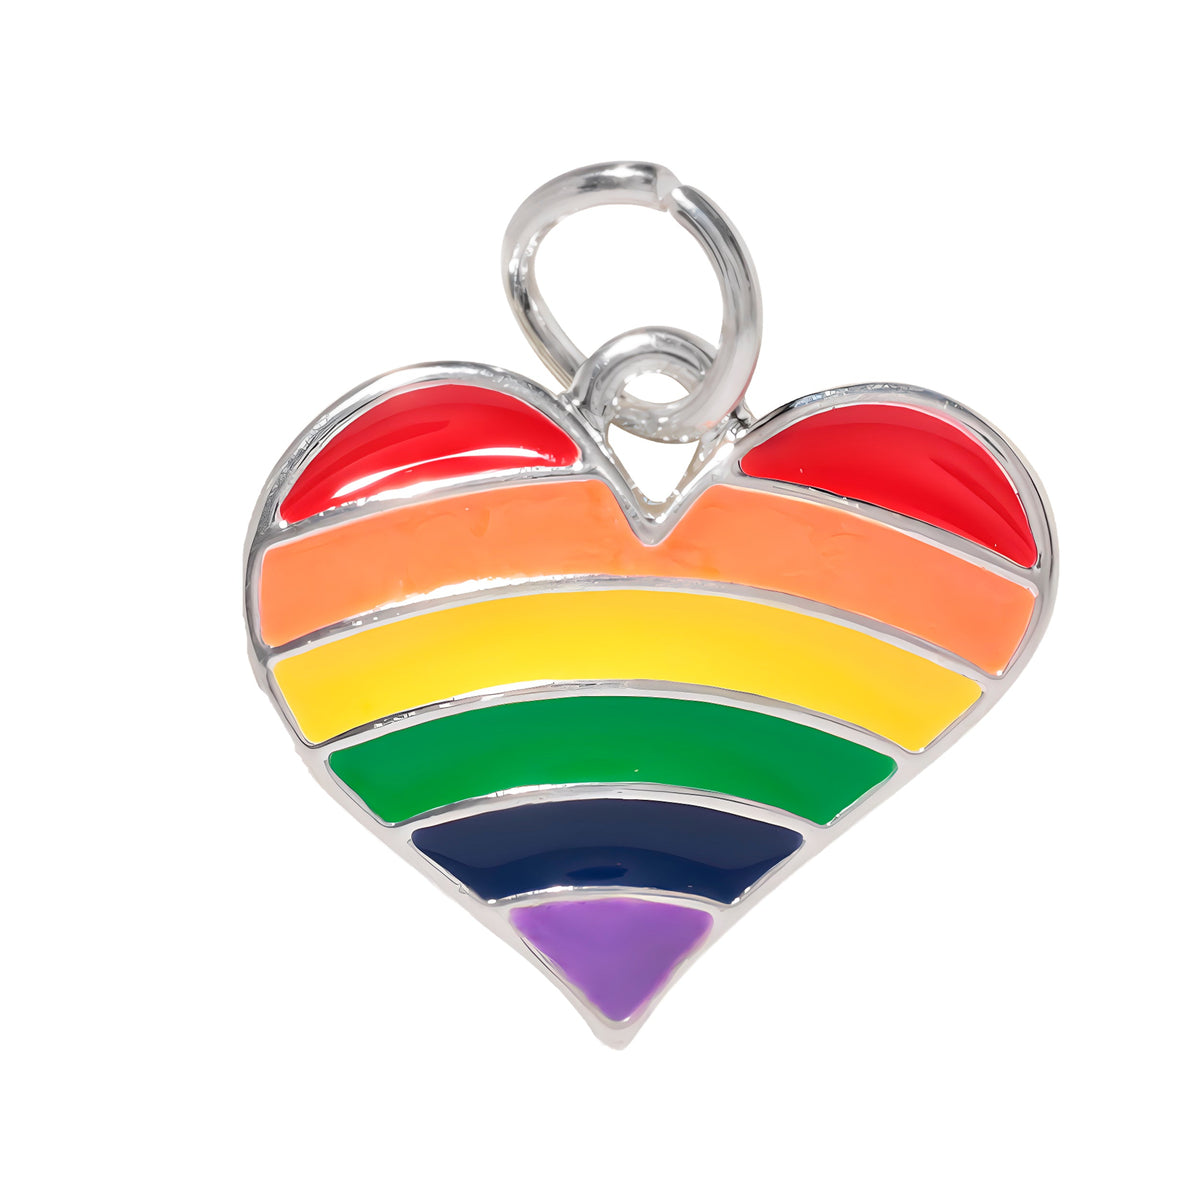 Rainbow LGBTQ Pride Love Wins Charms in Bulk for Jewelry Making